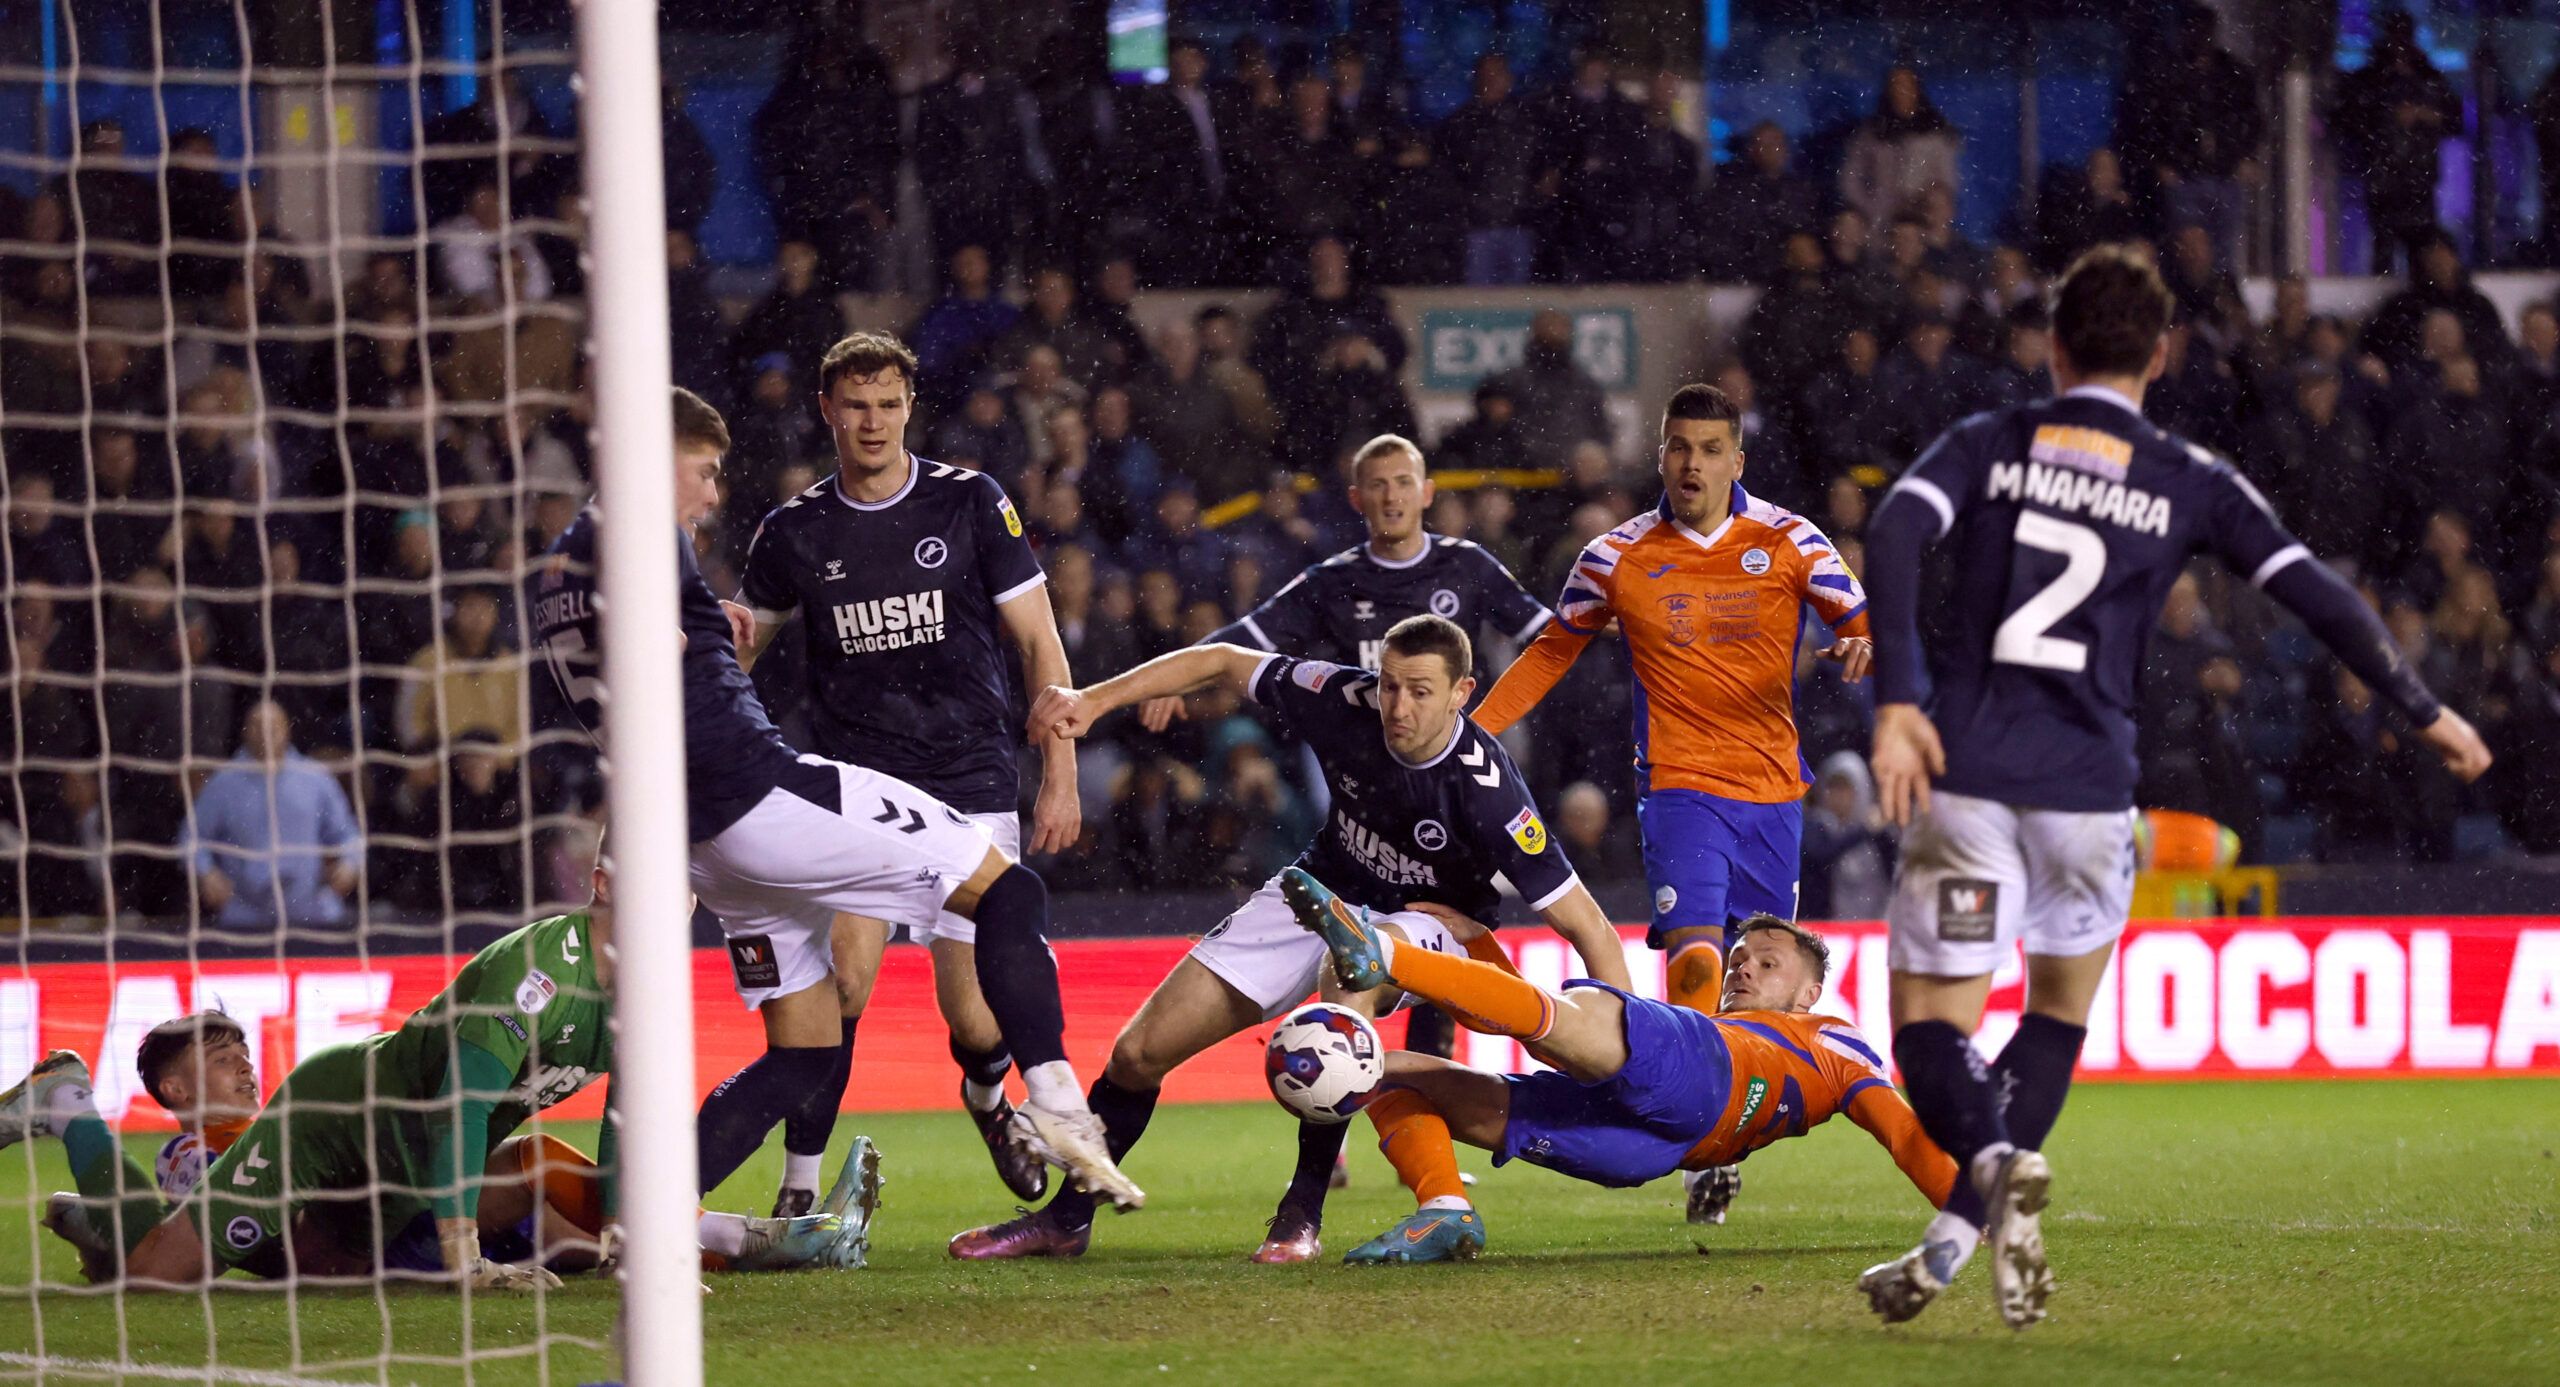 Millwall 2-1 Swansea: FLW reports Lions win back-to-back games after hectic second half